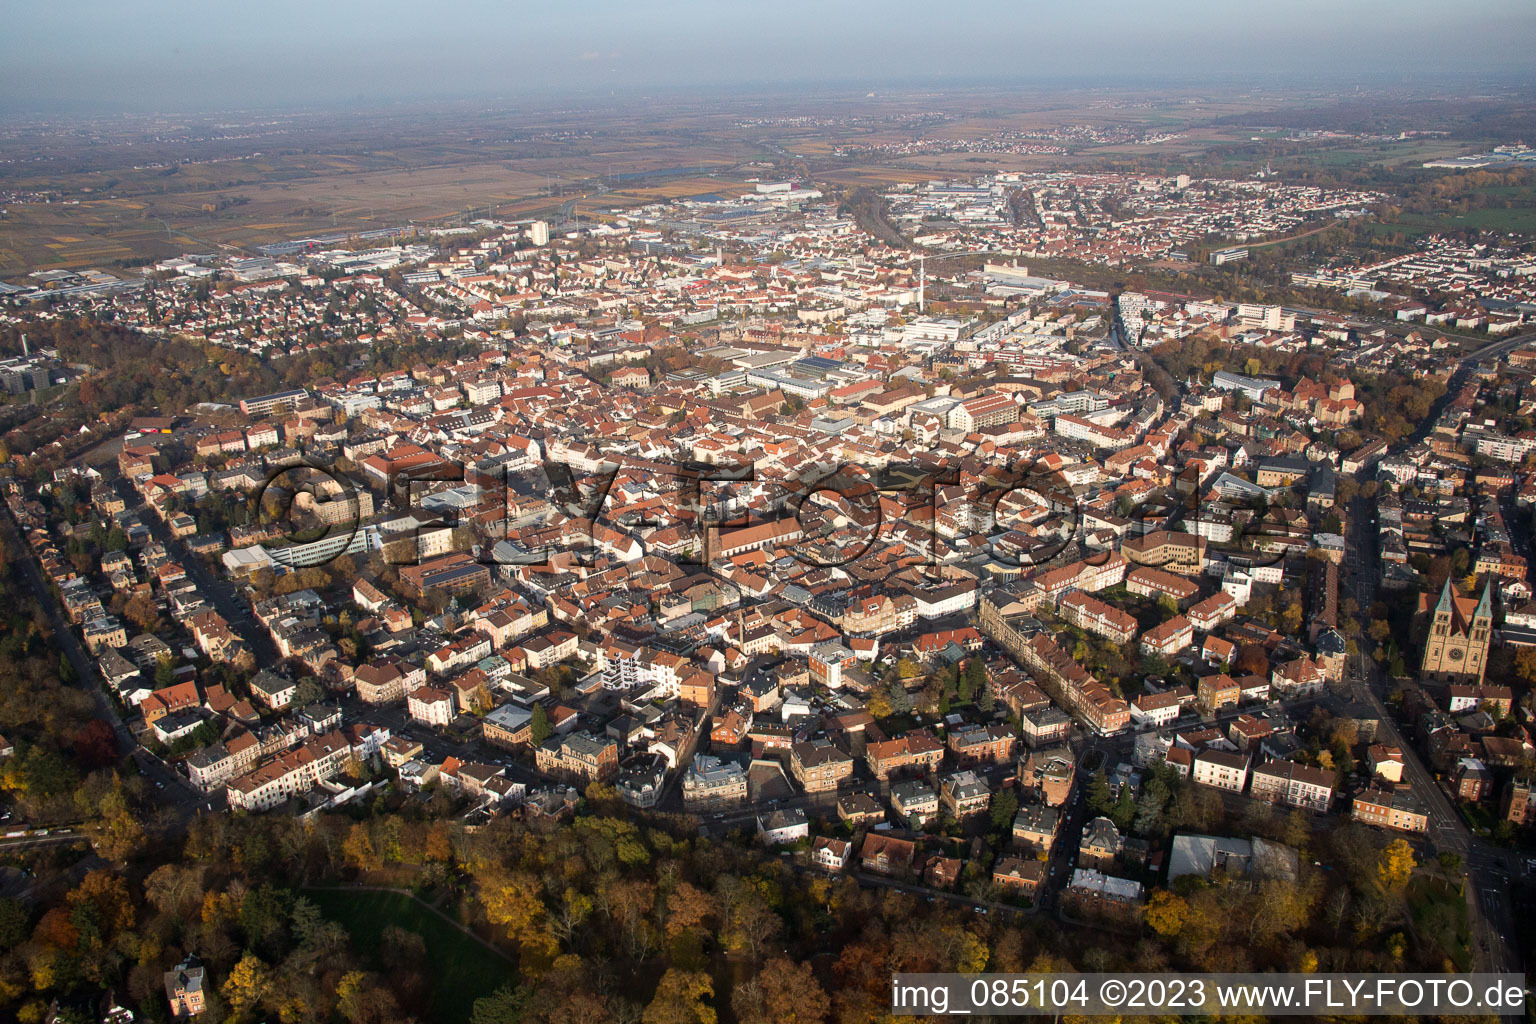 Landau in der Pfalz in the state Rhineland-Palatinate, Germany seen from above